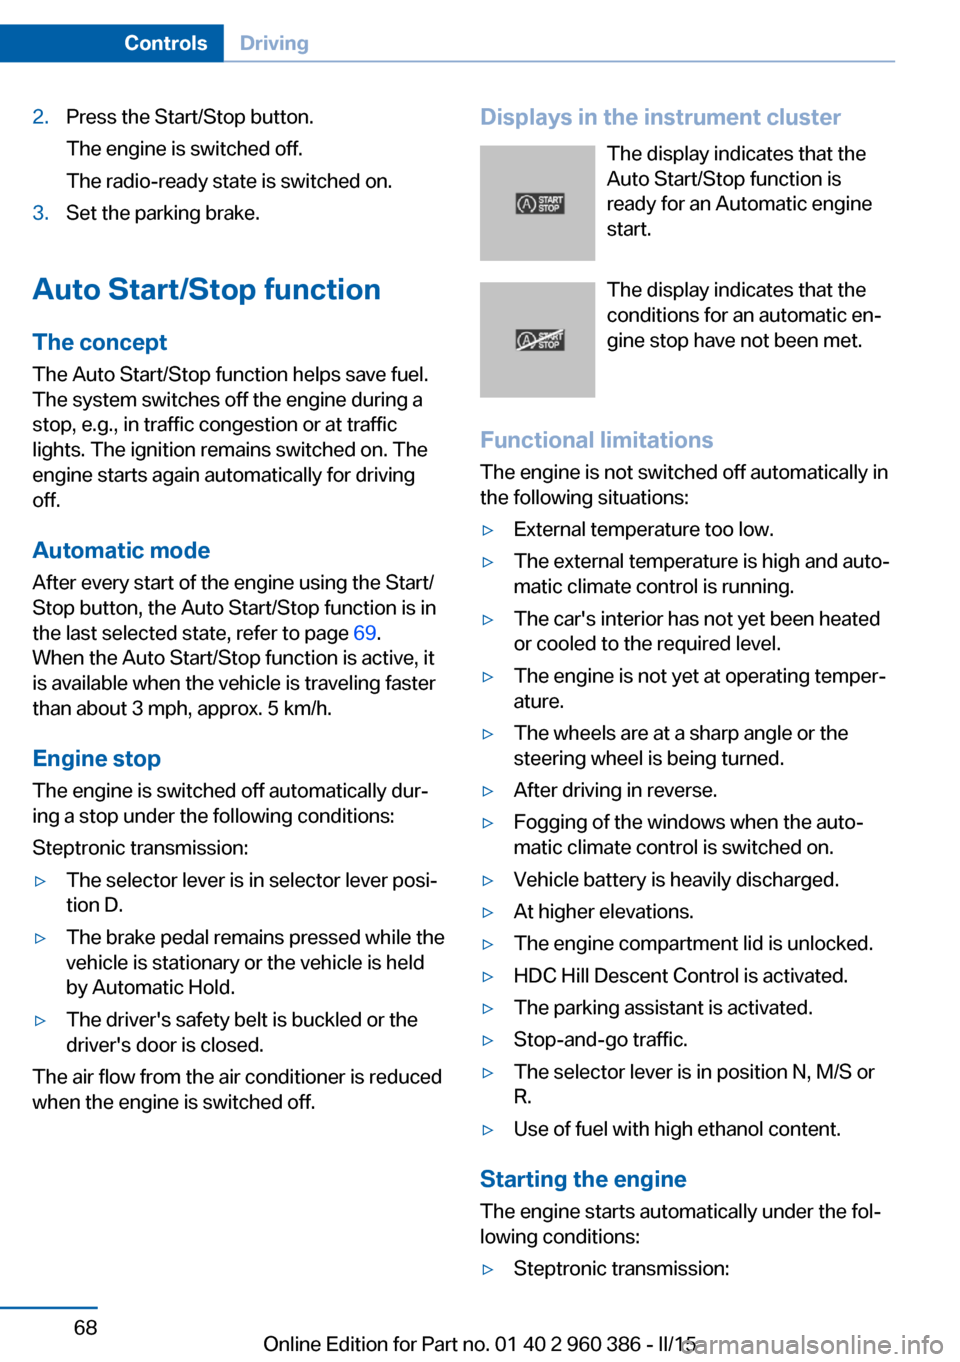 BMW X3 2016 F25 Owners Manual 2.Press the Start/Stop button.
The engine is switched off.
The radio-ready state is switched on.3.Set the parking brake.
Auto Start/Stop function
The concept The Auto Start/Stop function helps save fu